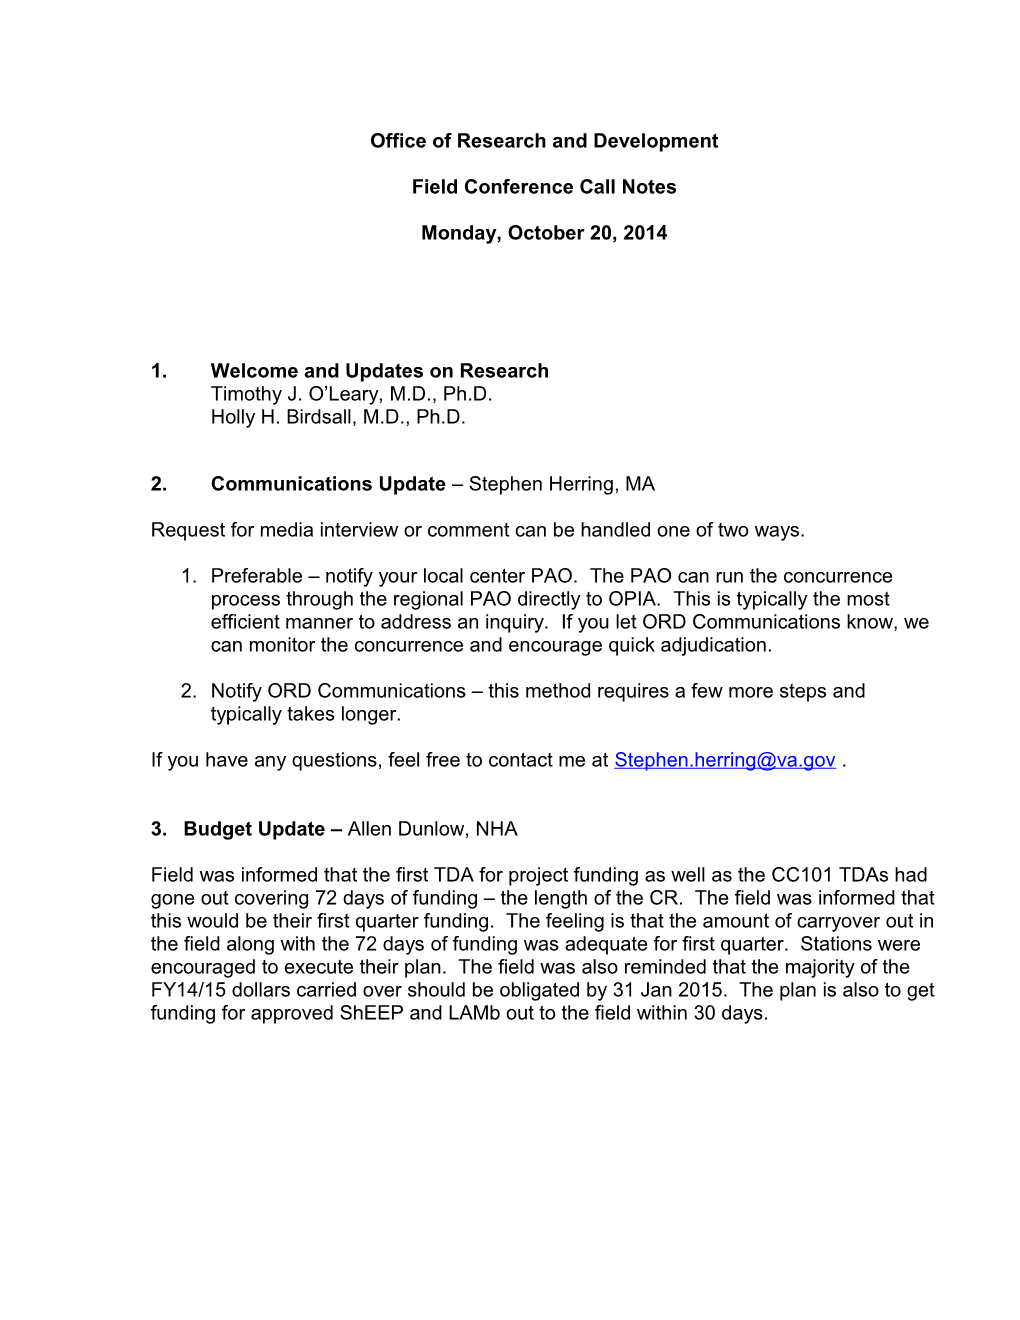 VA ORD Conference Call Notes, October 20, 2014